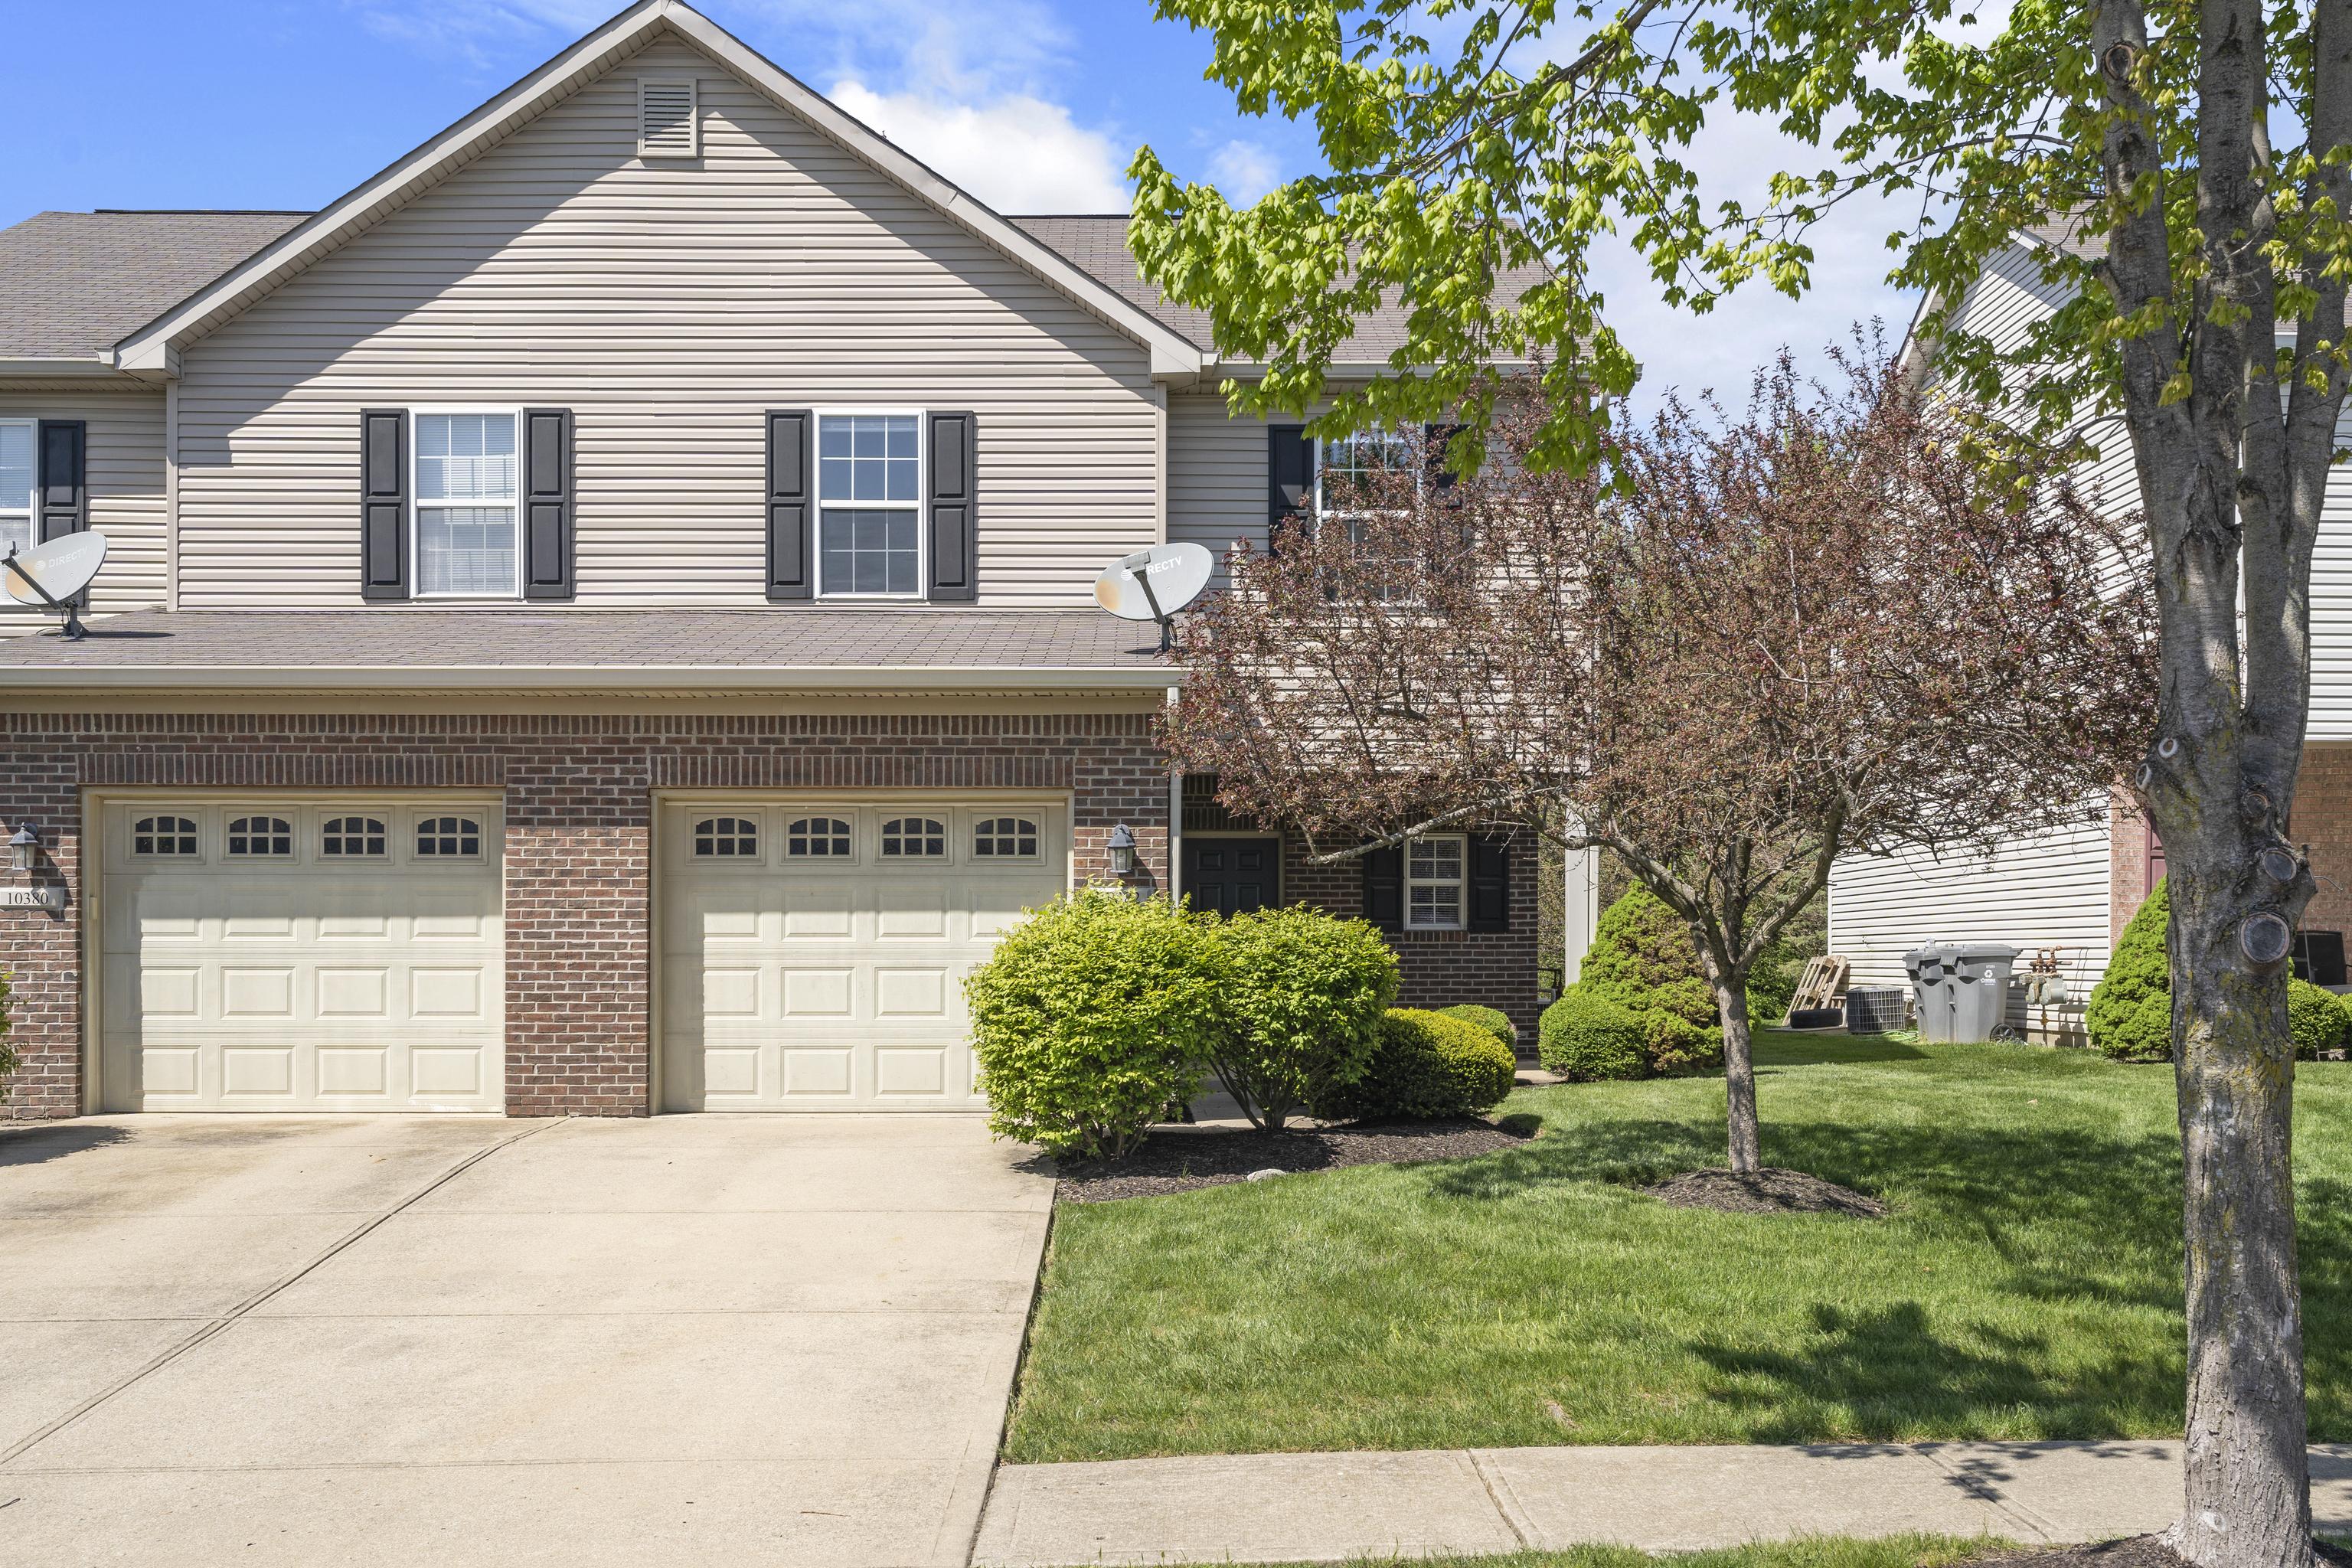 Photo one of 10382 Platinum Dr Noblesville IN 46060 | MLS 21977411